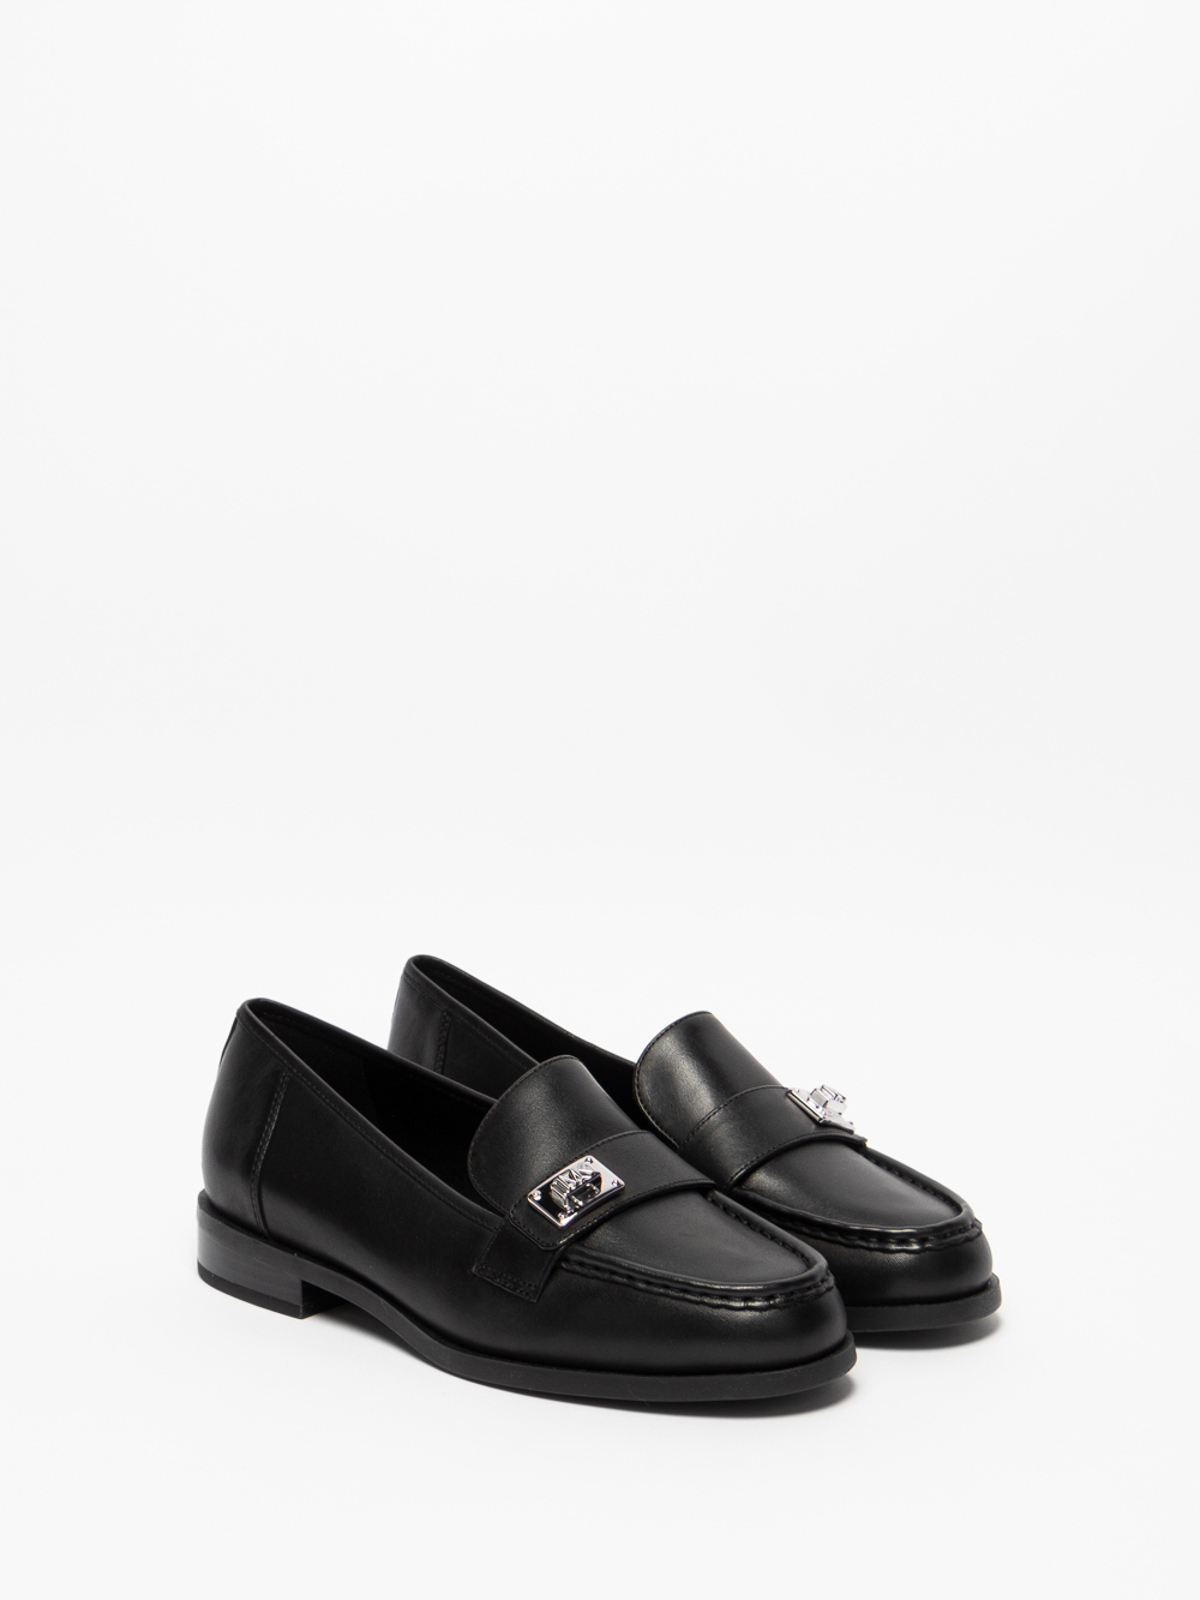 Loafers & Slippers Michael Kors - Padma loafers - 40T2PDFP1L001